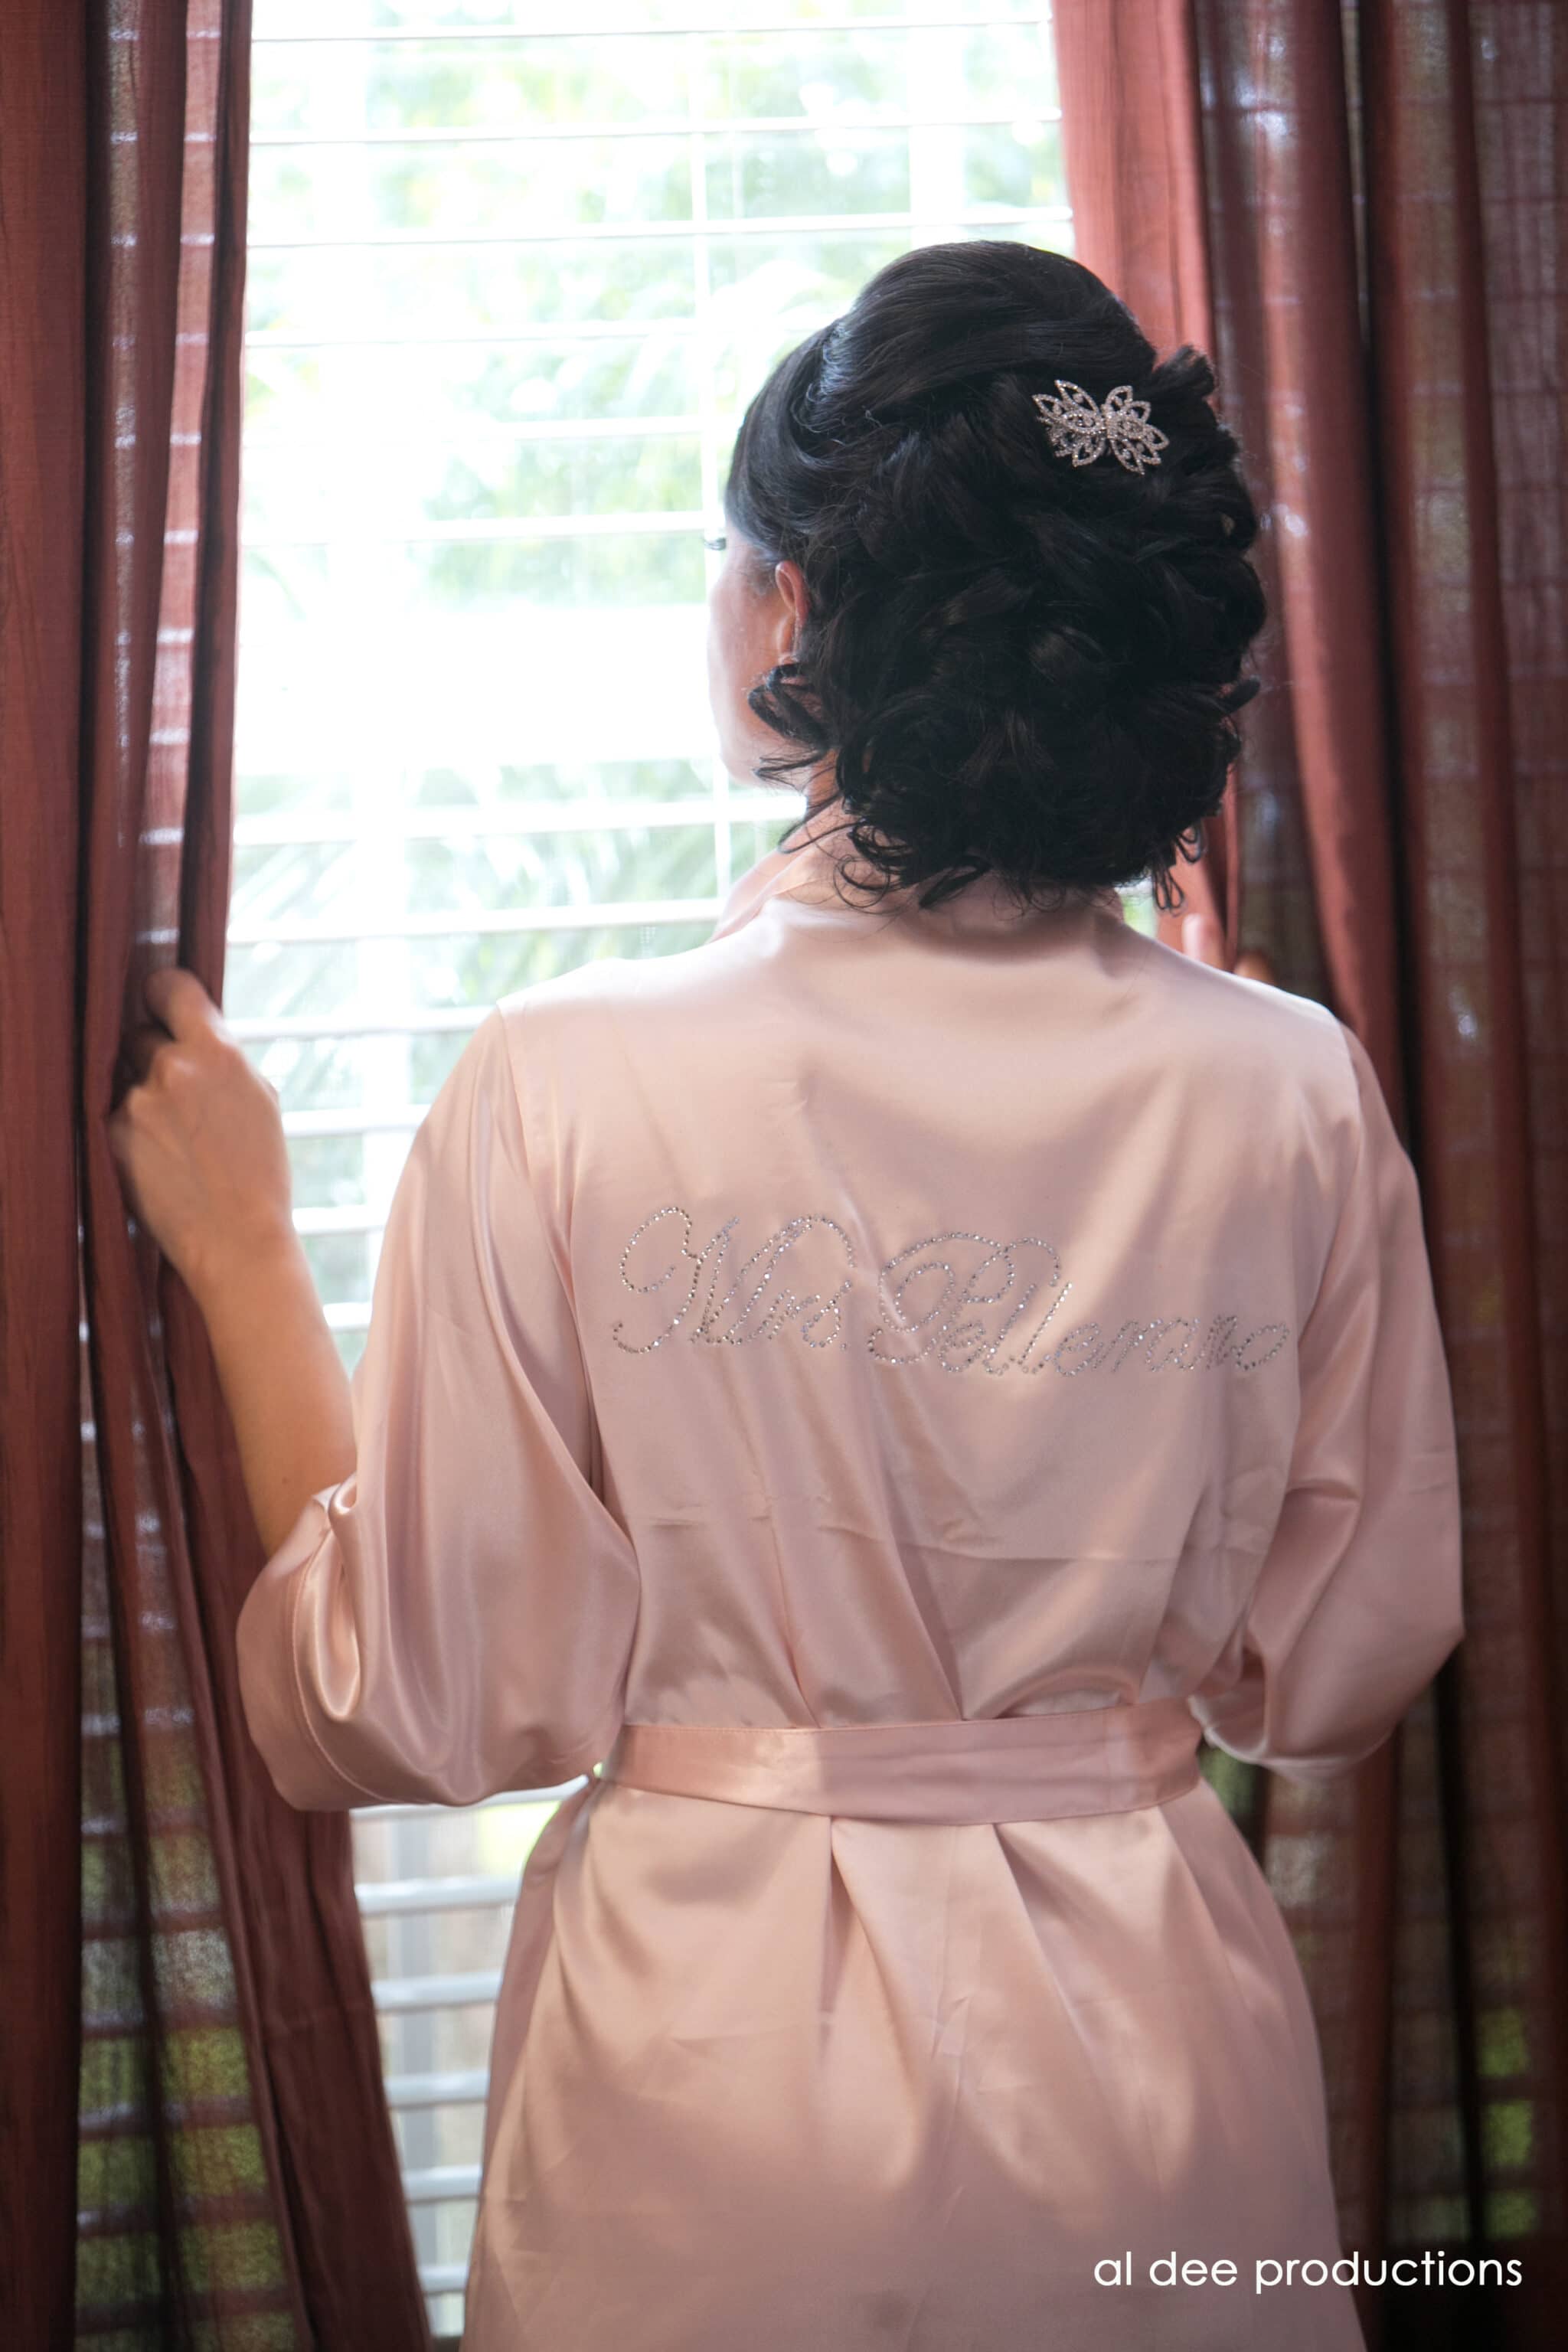 Back view of bride looking out window